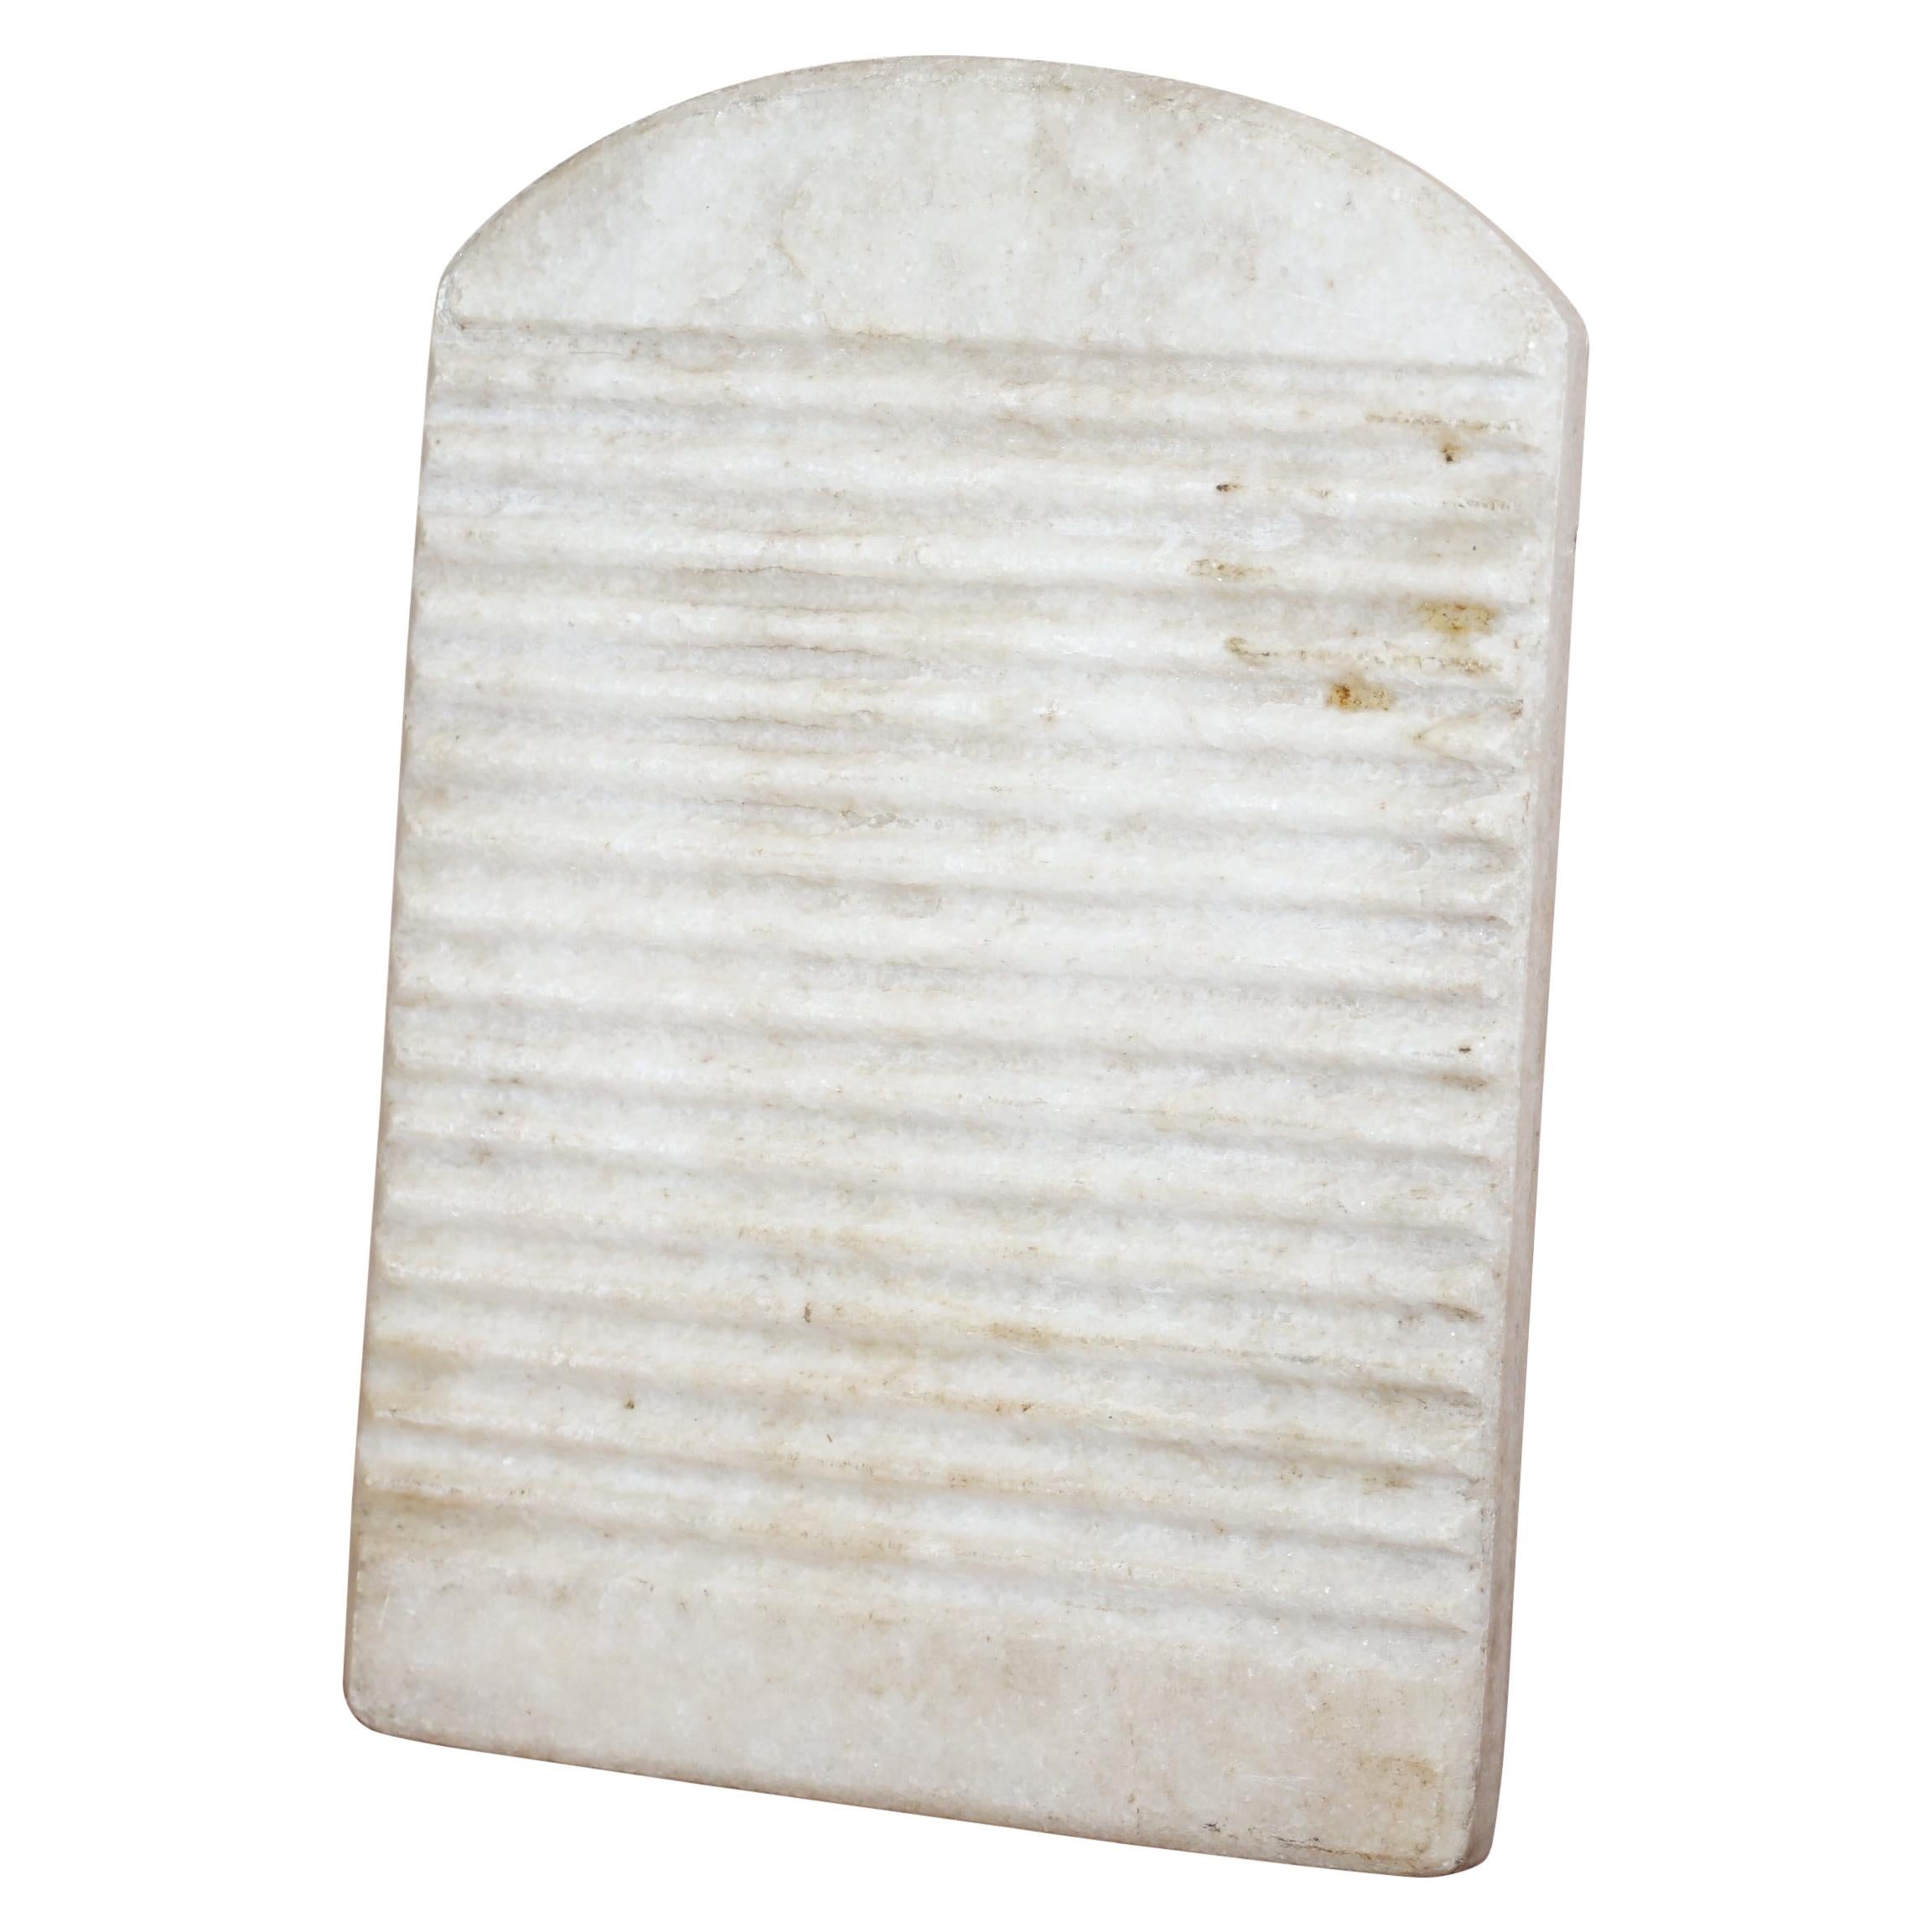 Rare 19th Century Spanish Solid Marble Wash Board for Washing Clothes Old Way